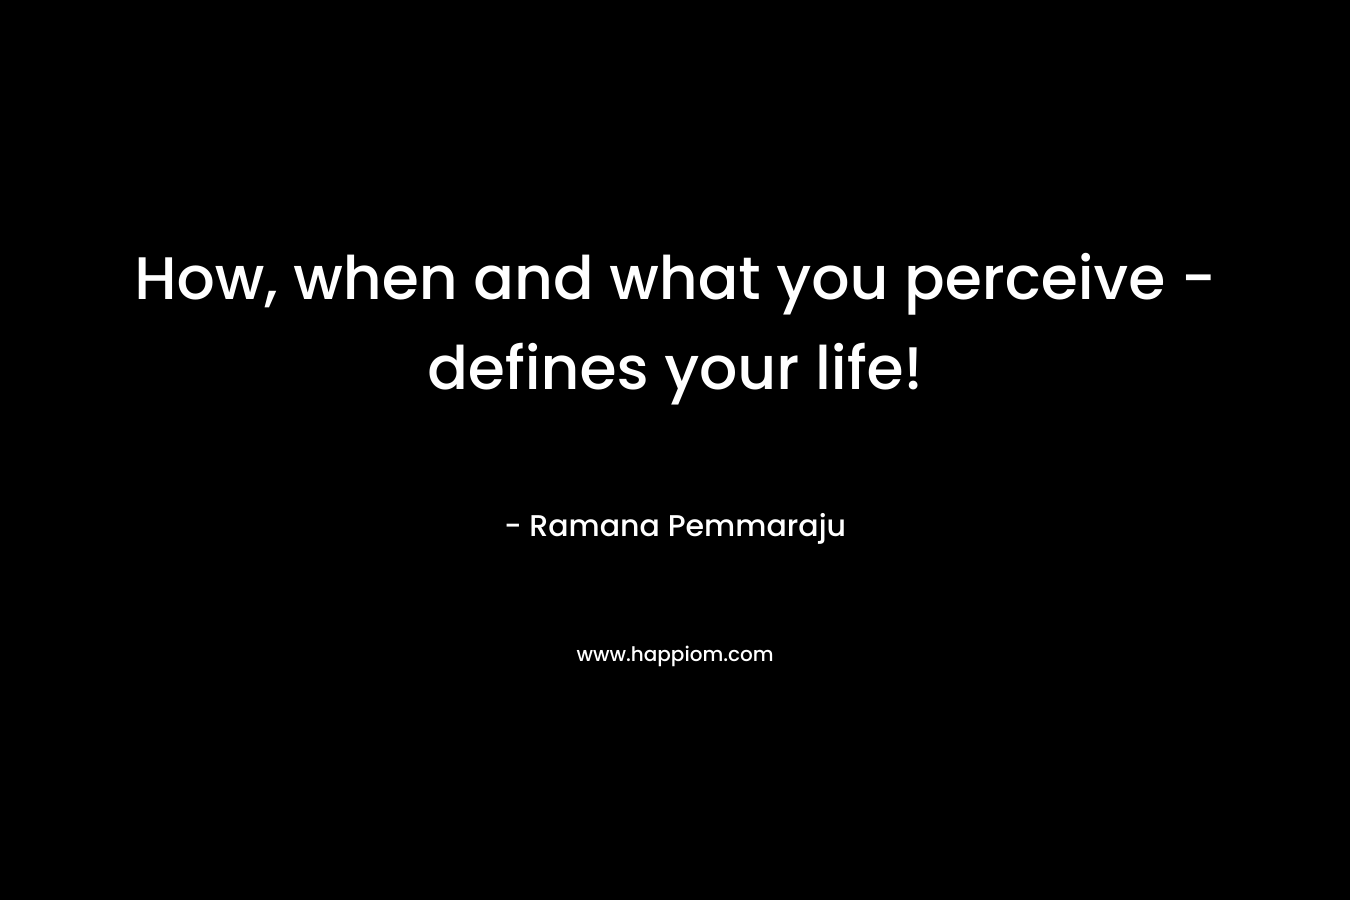 How, when and what you perceive - defines your life!